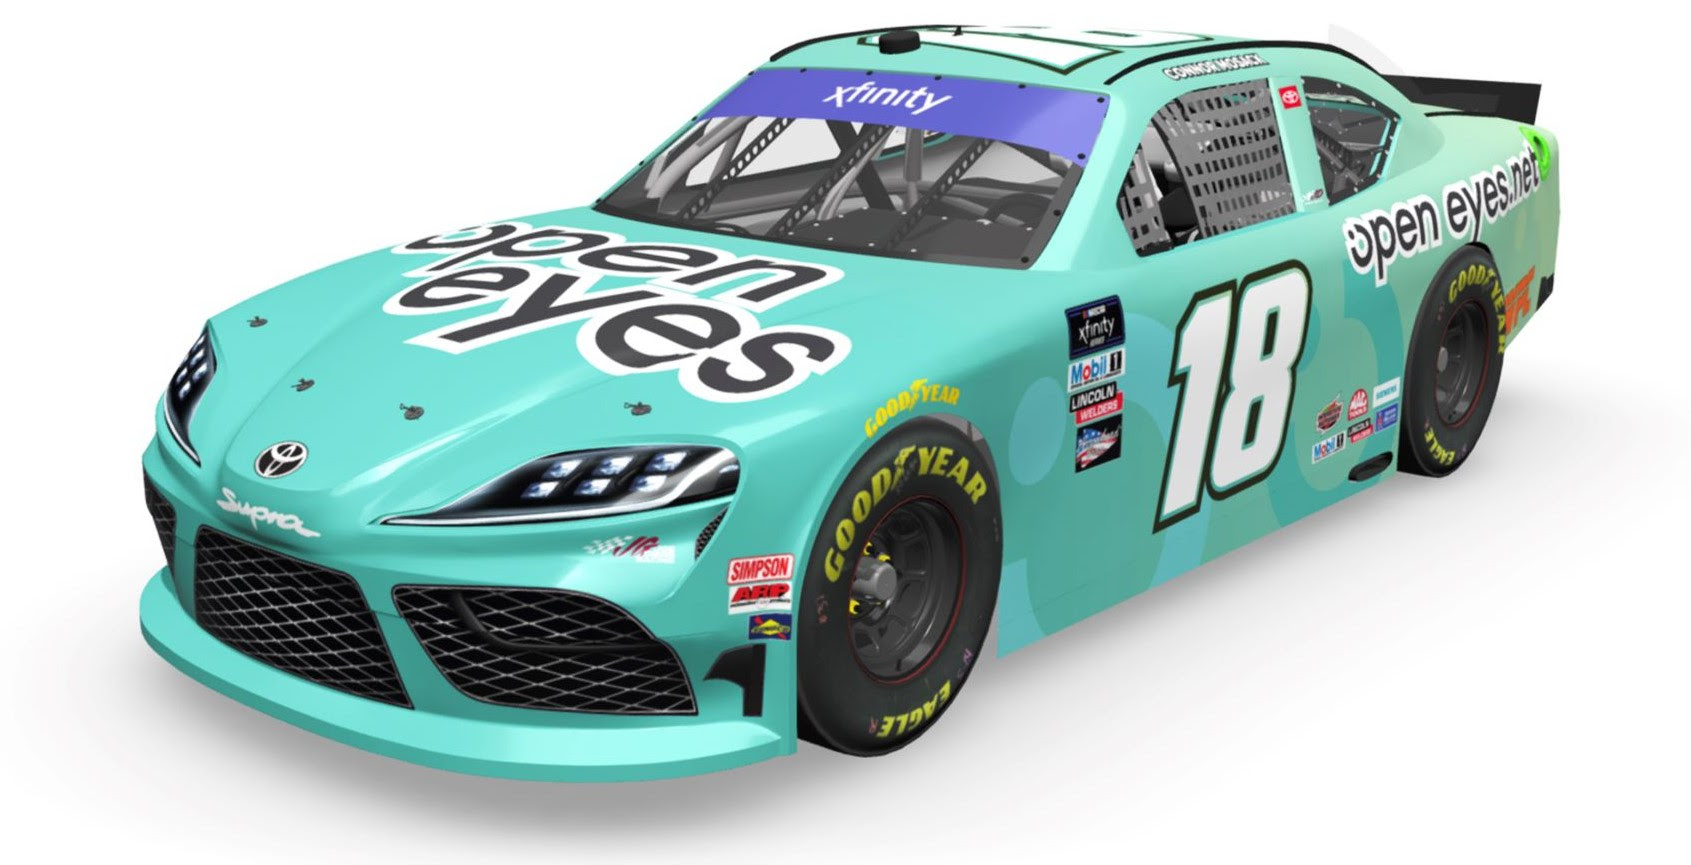 Trans Am Racer Connor Mosack To Make NASCAR Xfinity Series Debut in Portland with Joe Gibbs Racing